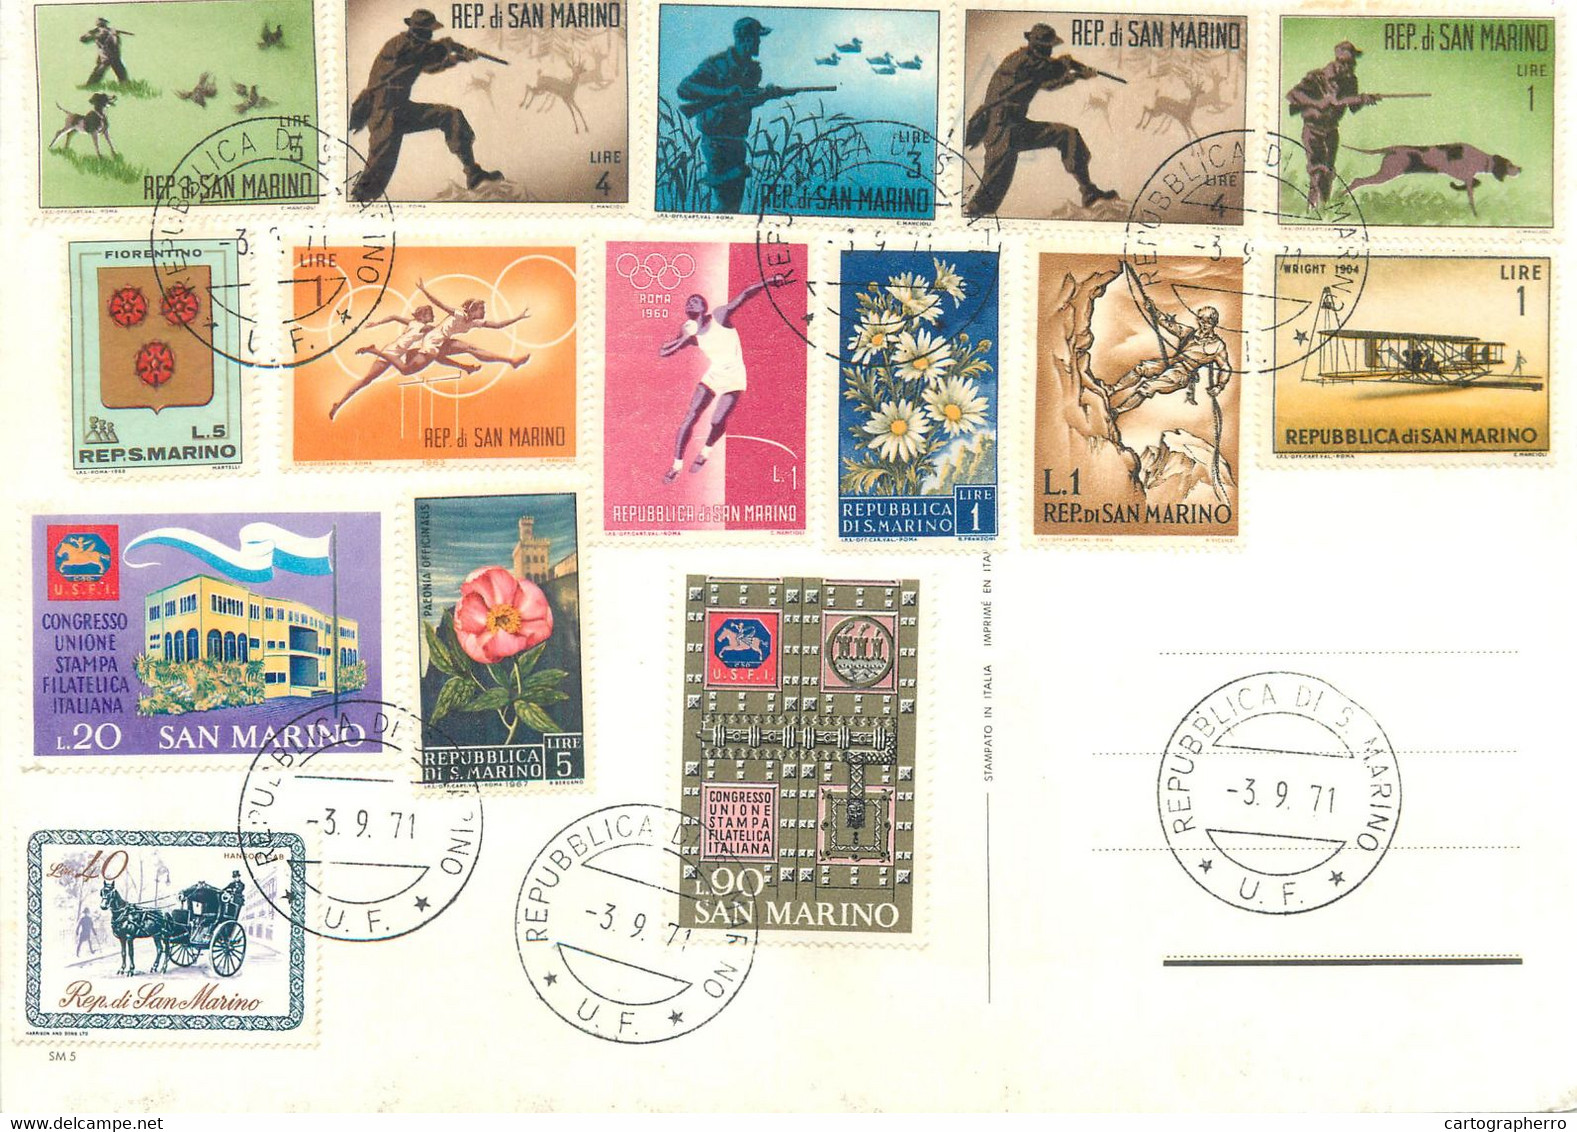 Lot 3 Extra Size Postcards SAN MARINO Atypical 13 X 19 Cm Multi Nice Franking Stamps Local Motifs Sports & Fauna Topical - Oblitérés